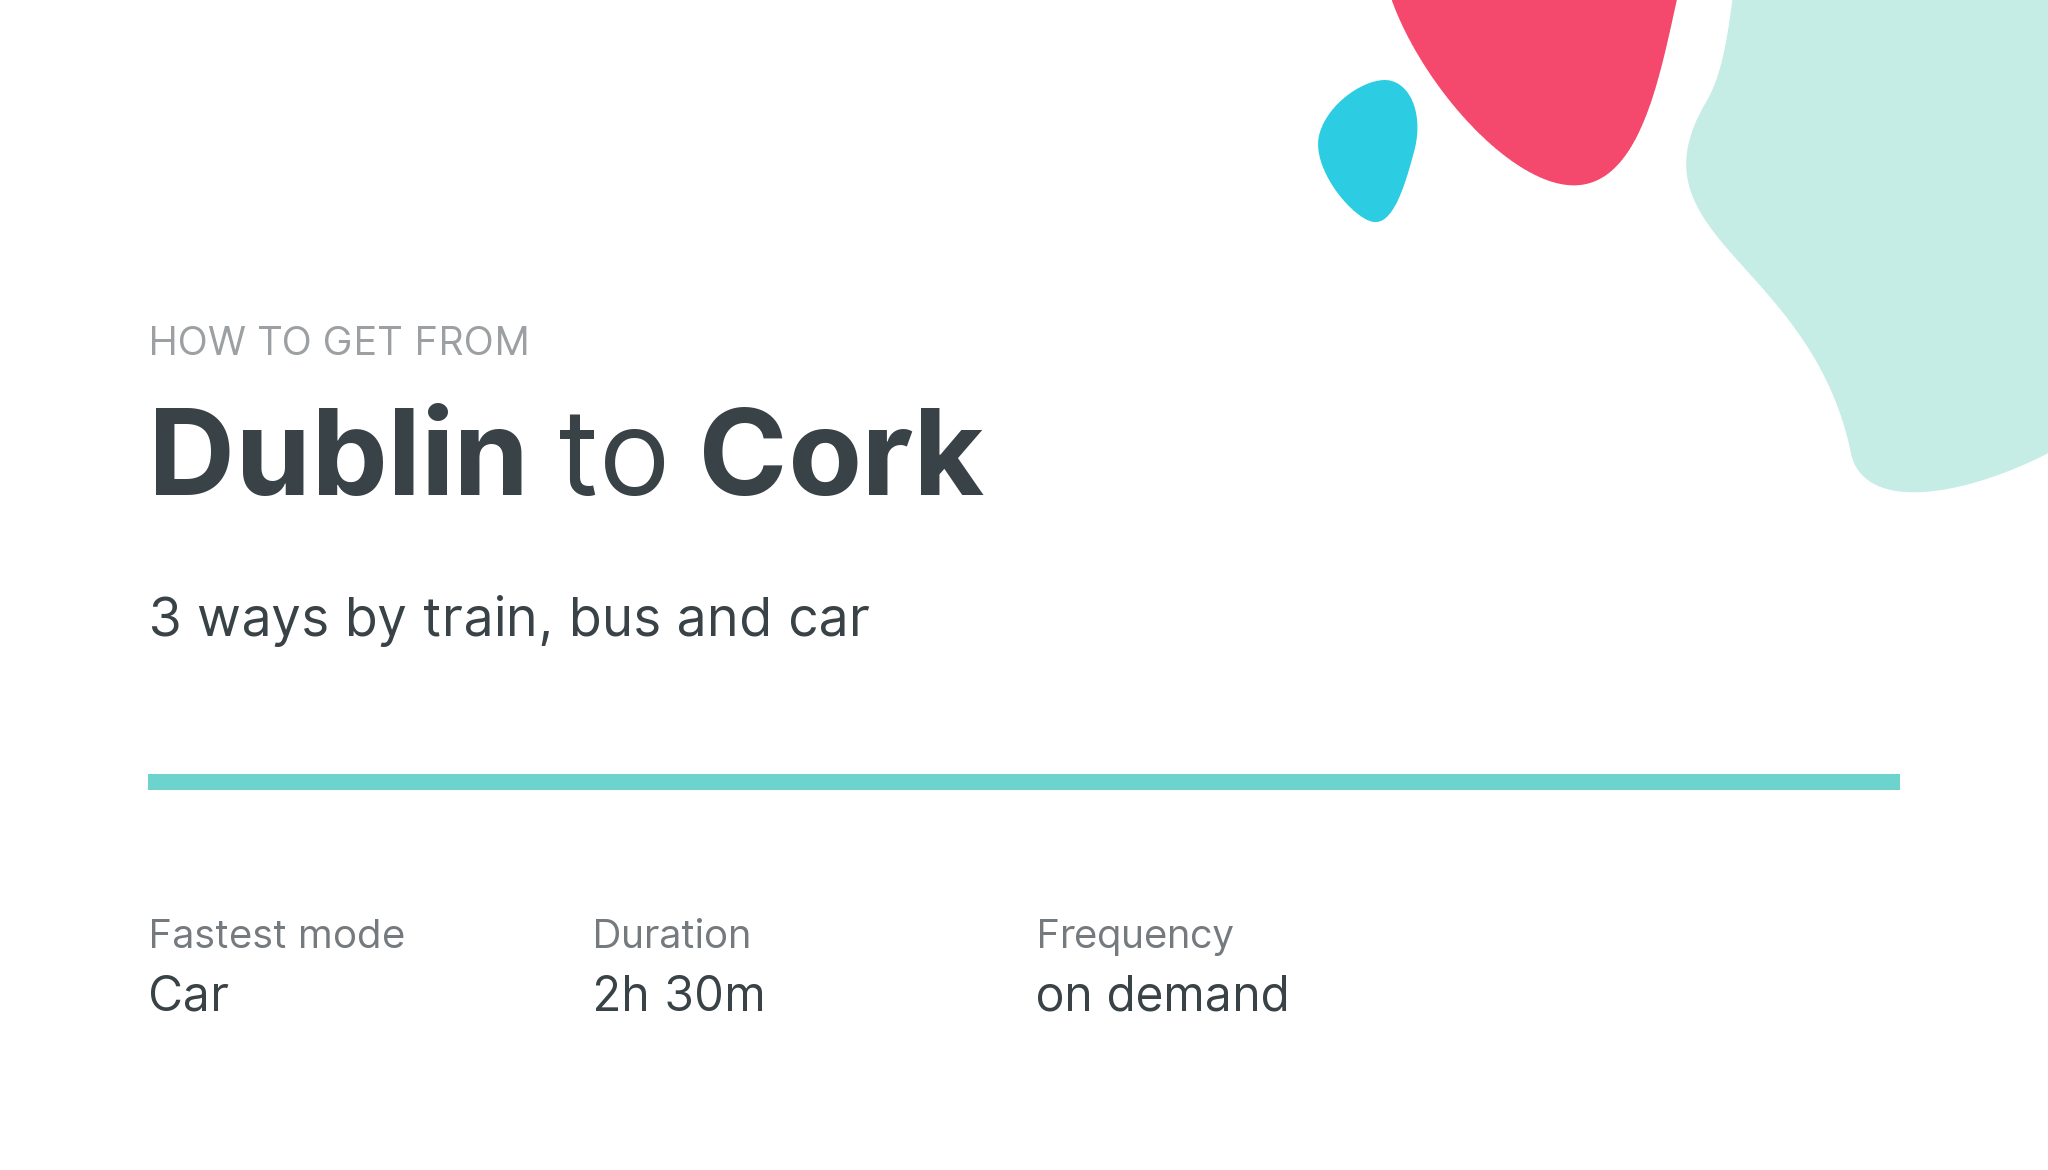 How do I get from Dublin to Cork